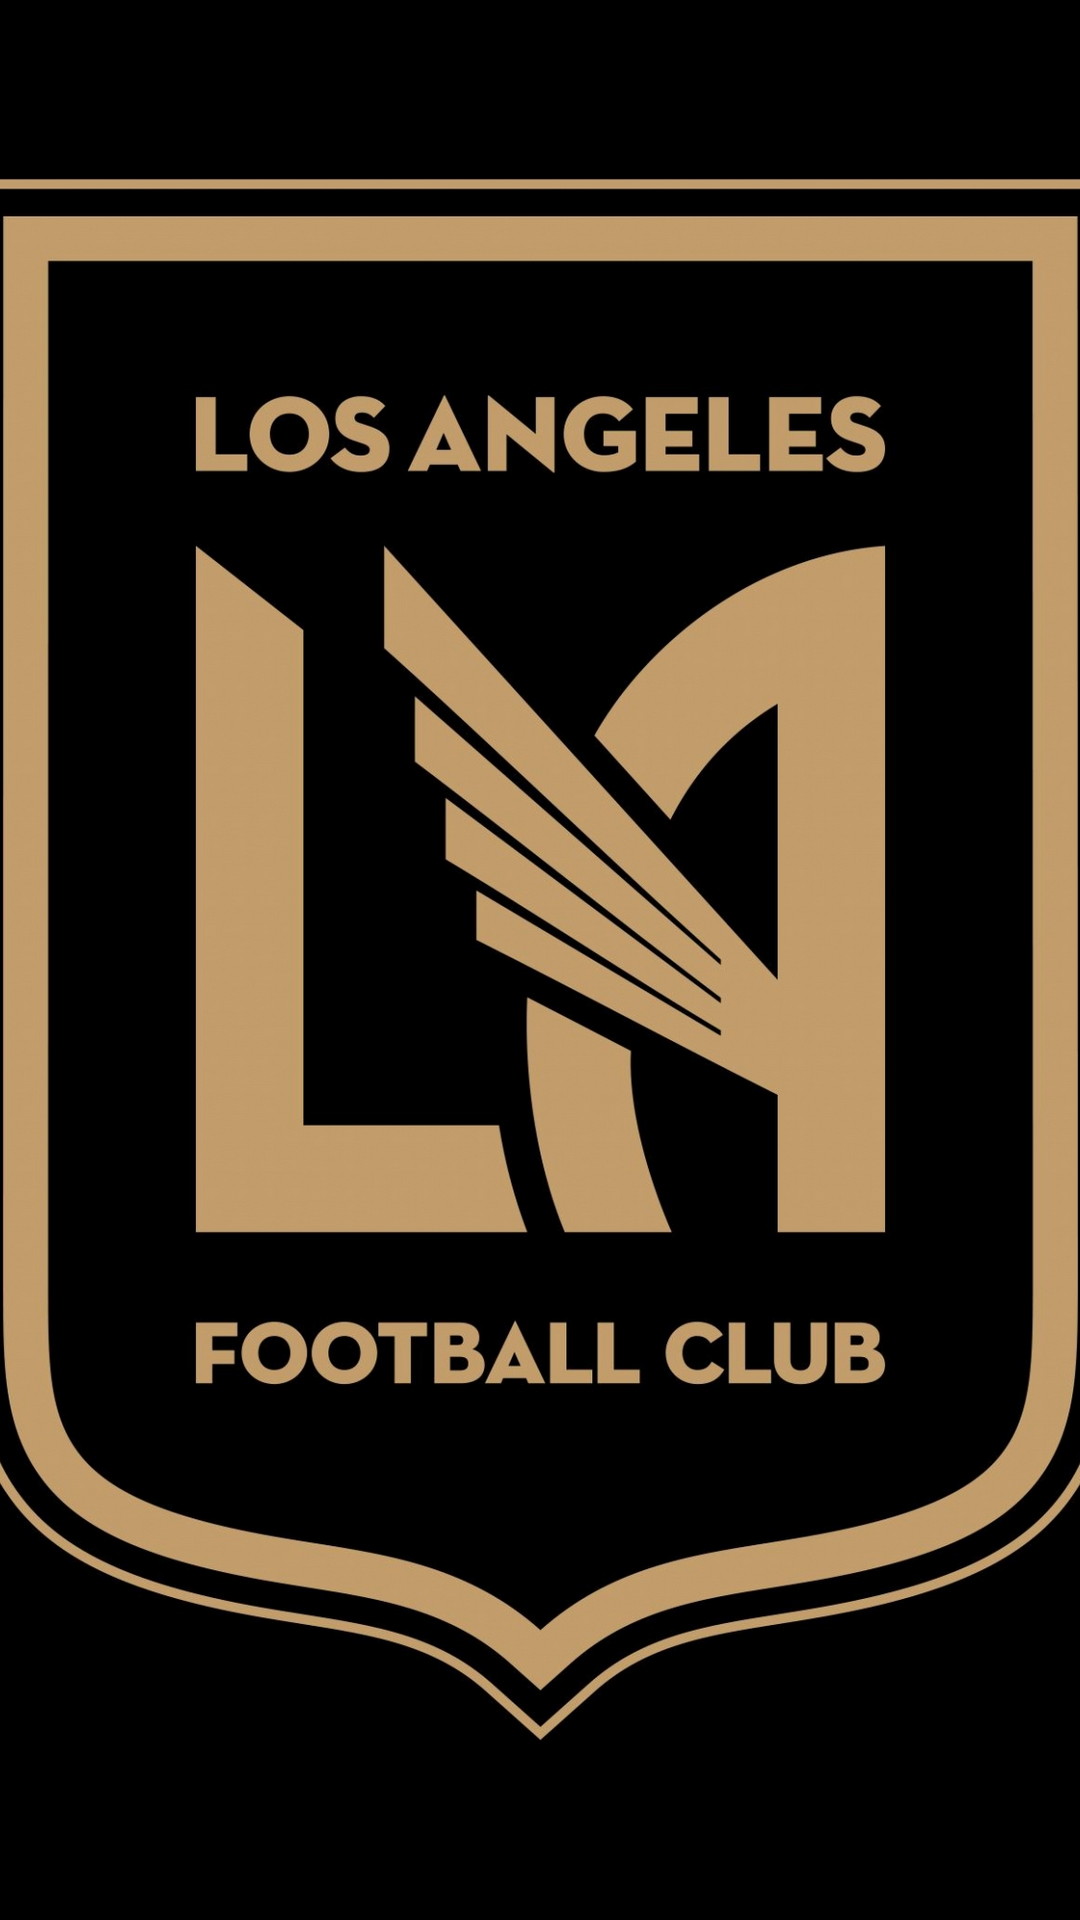 iPhone Wallpaper HD Los Angeles FC With high-resolution 1080X1920 pixel. You can use this wallpaper for your Desktop Computers, Mac Screensavers, Windows Backgrounds, iPhone Wallpapers, Tablet or Android Lock screen and another Mobile device